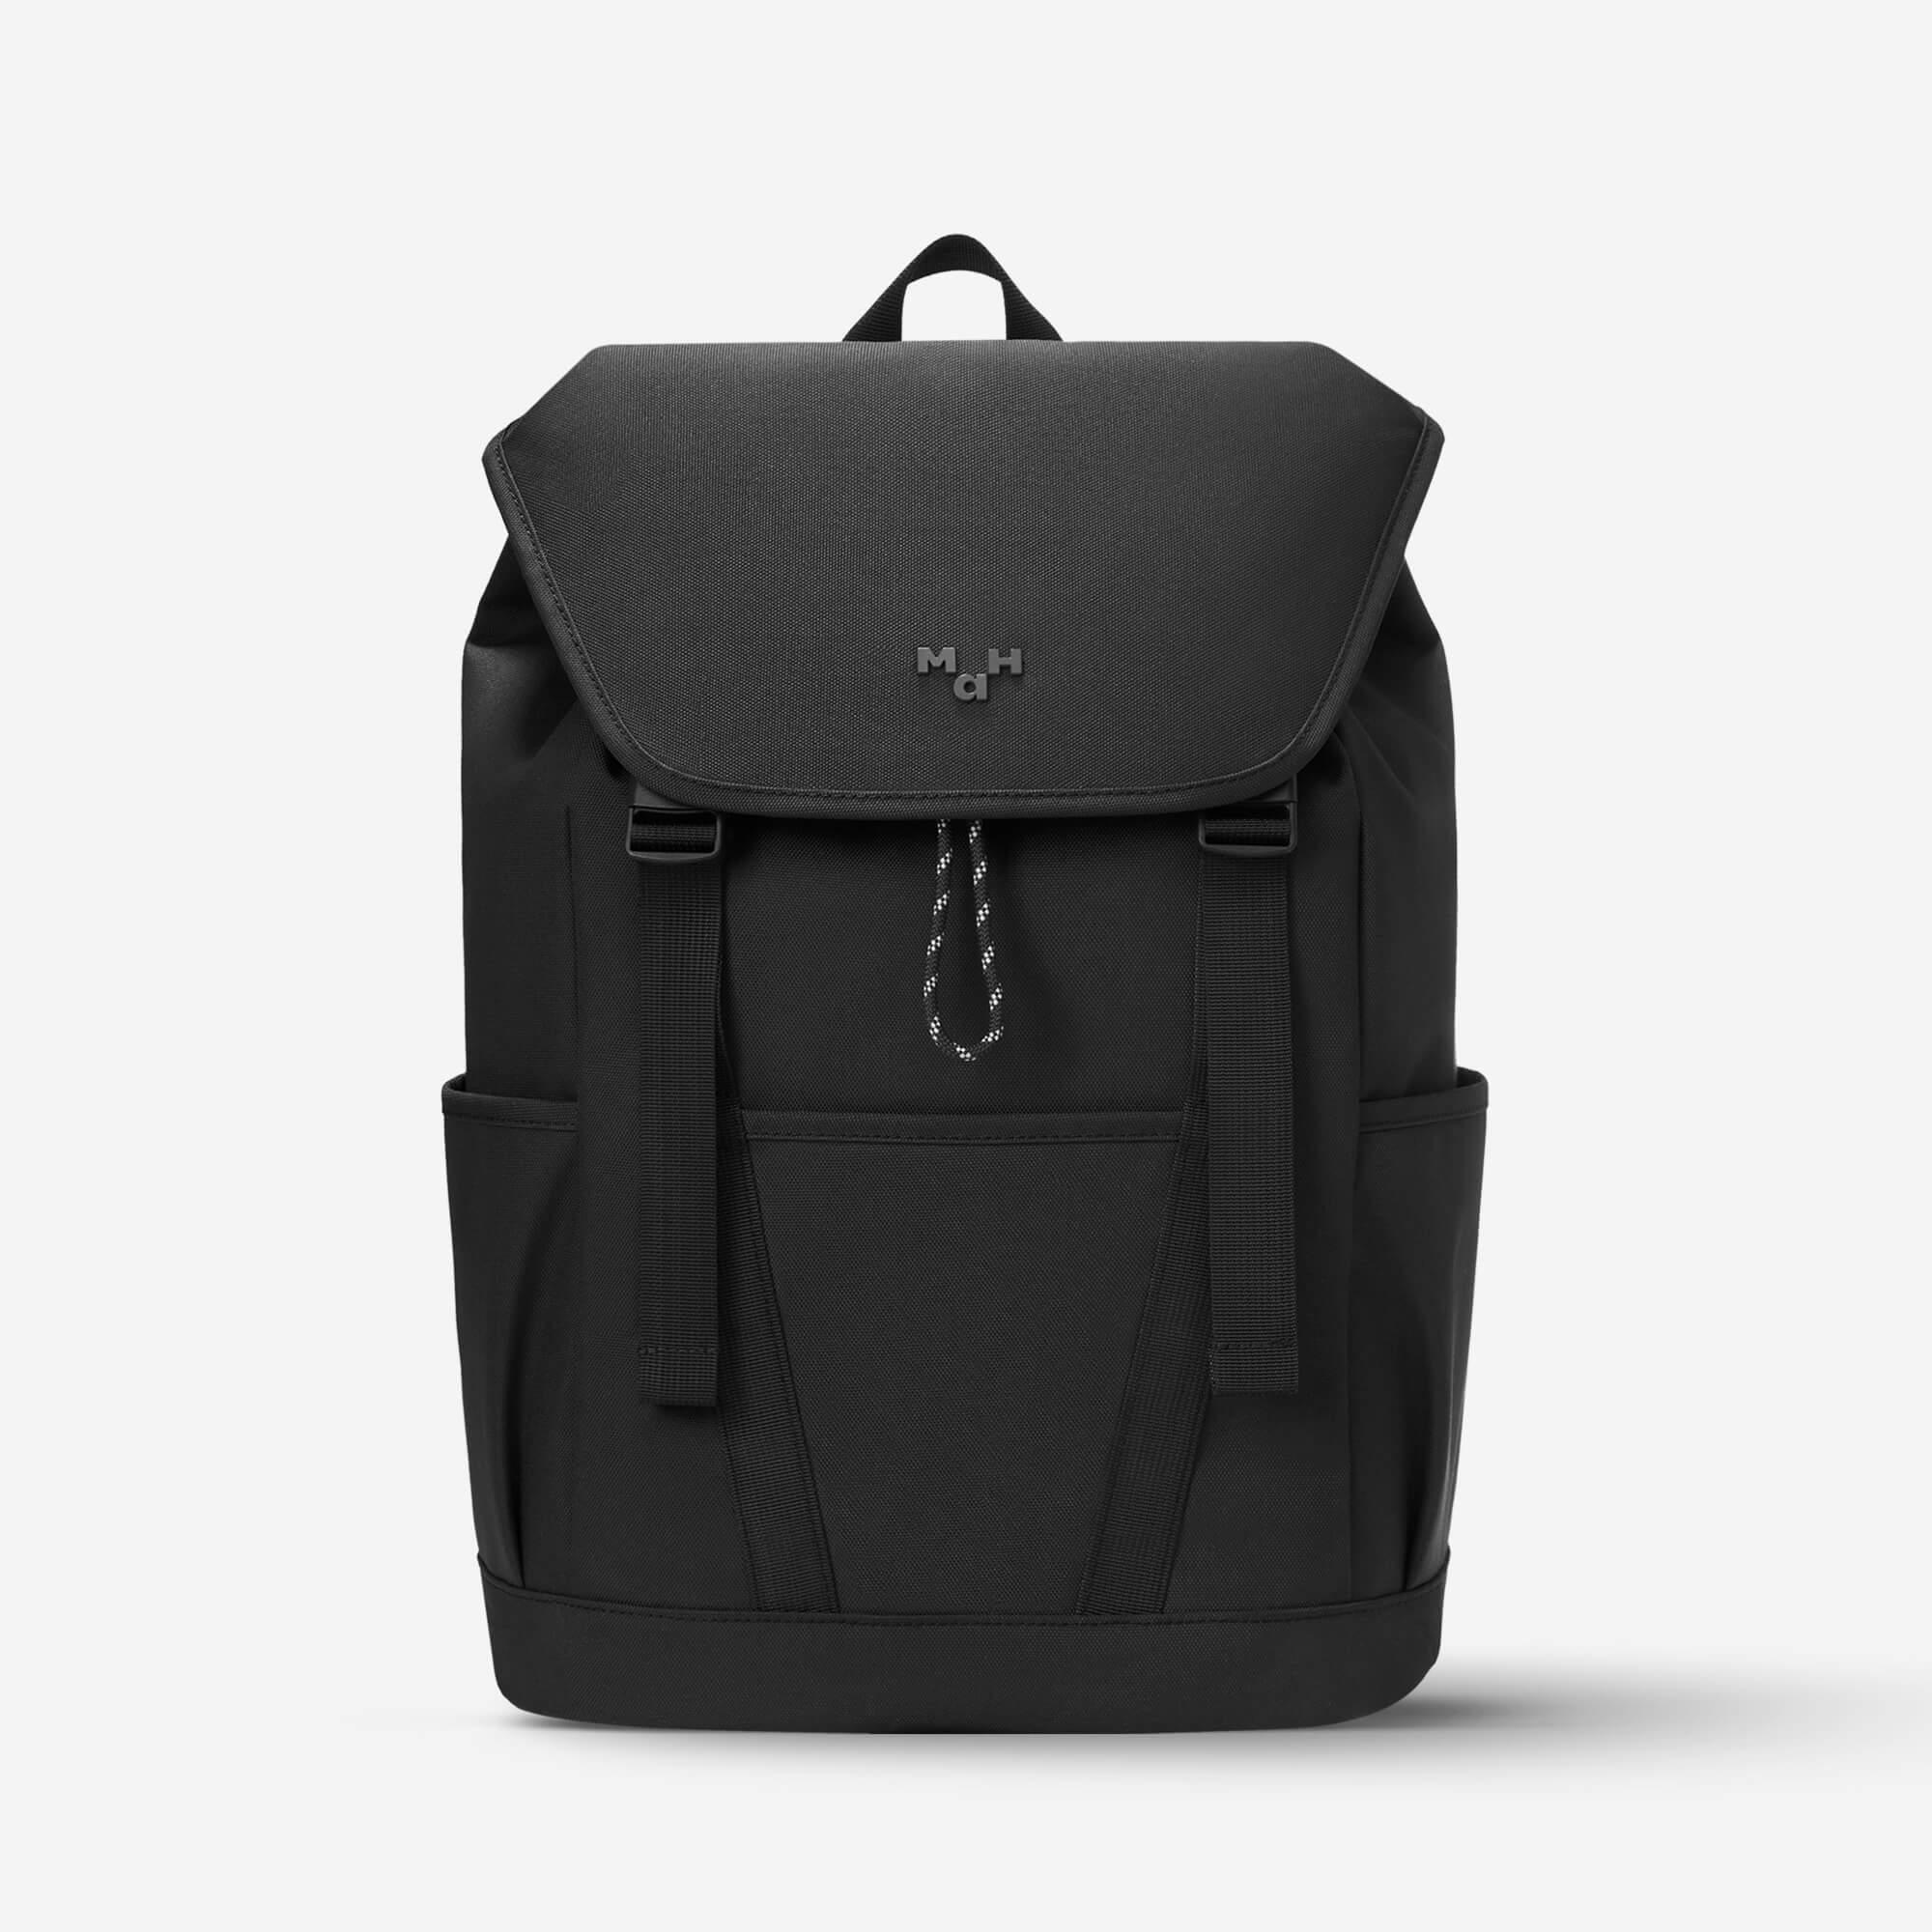 Traveling Backpack With Drawstring